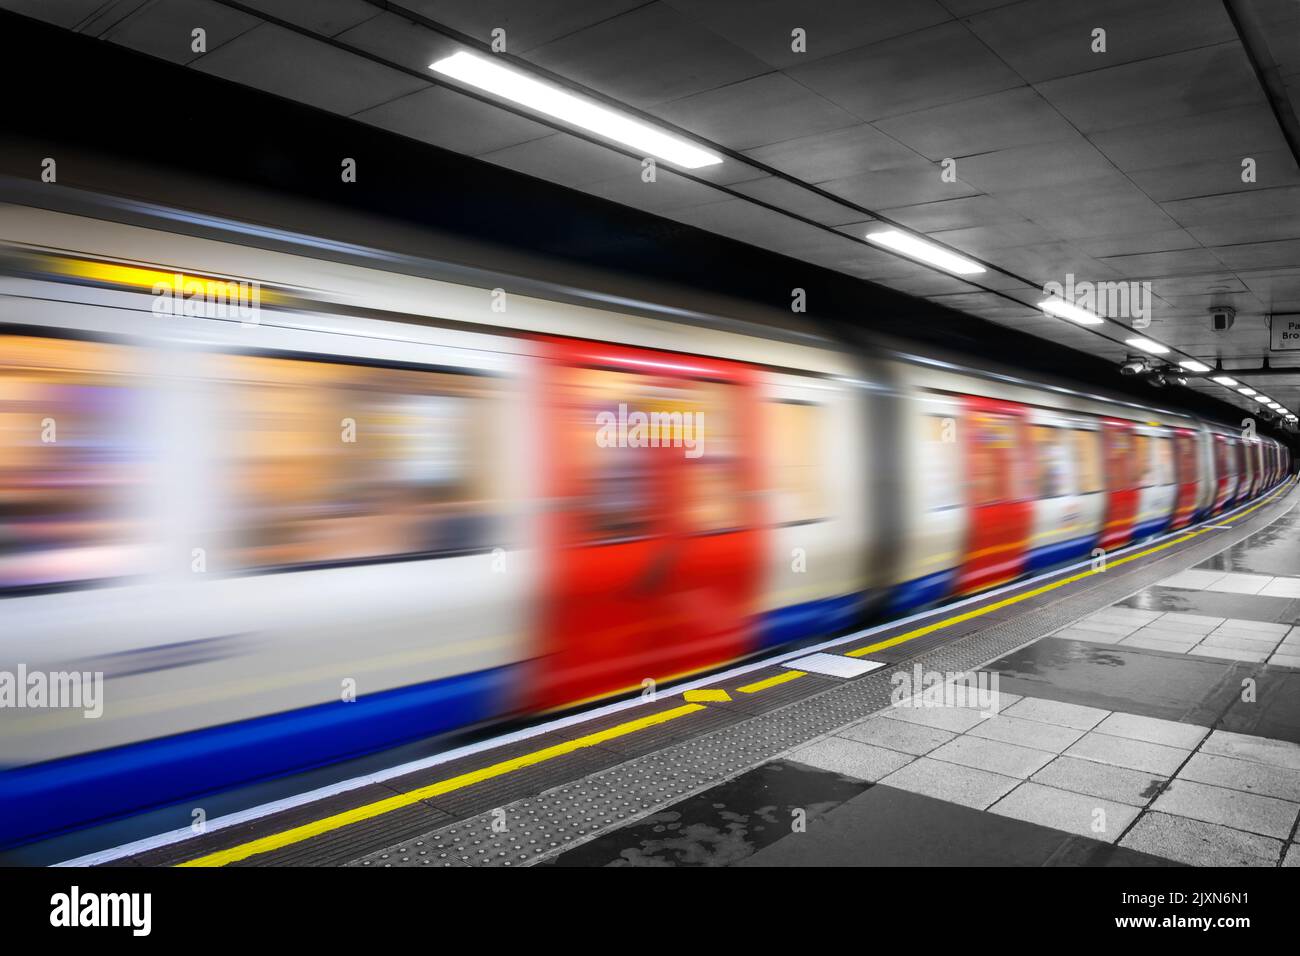 Moving tube train in an undergroud metro station, London Stock Photo